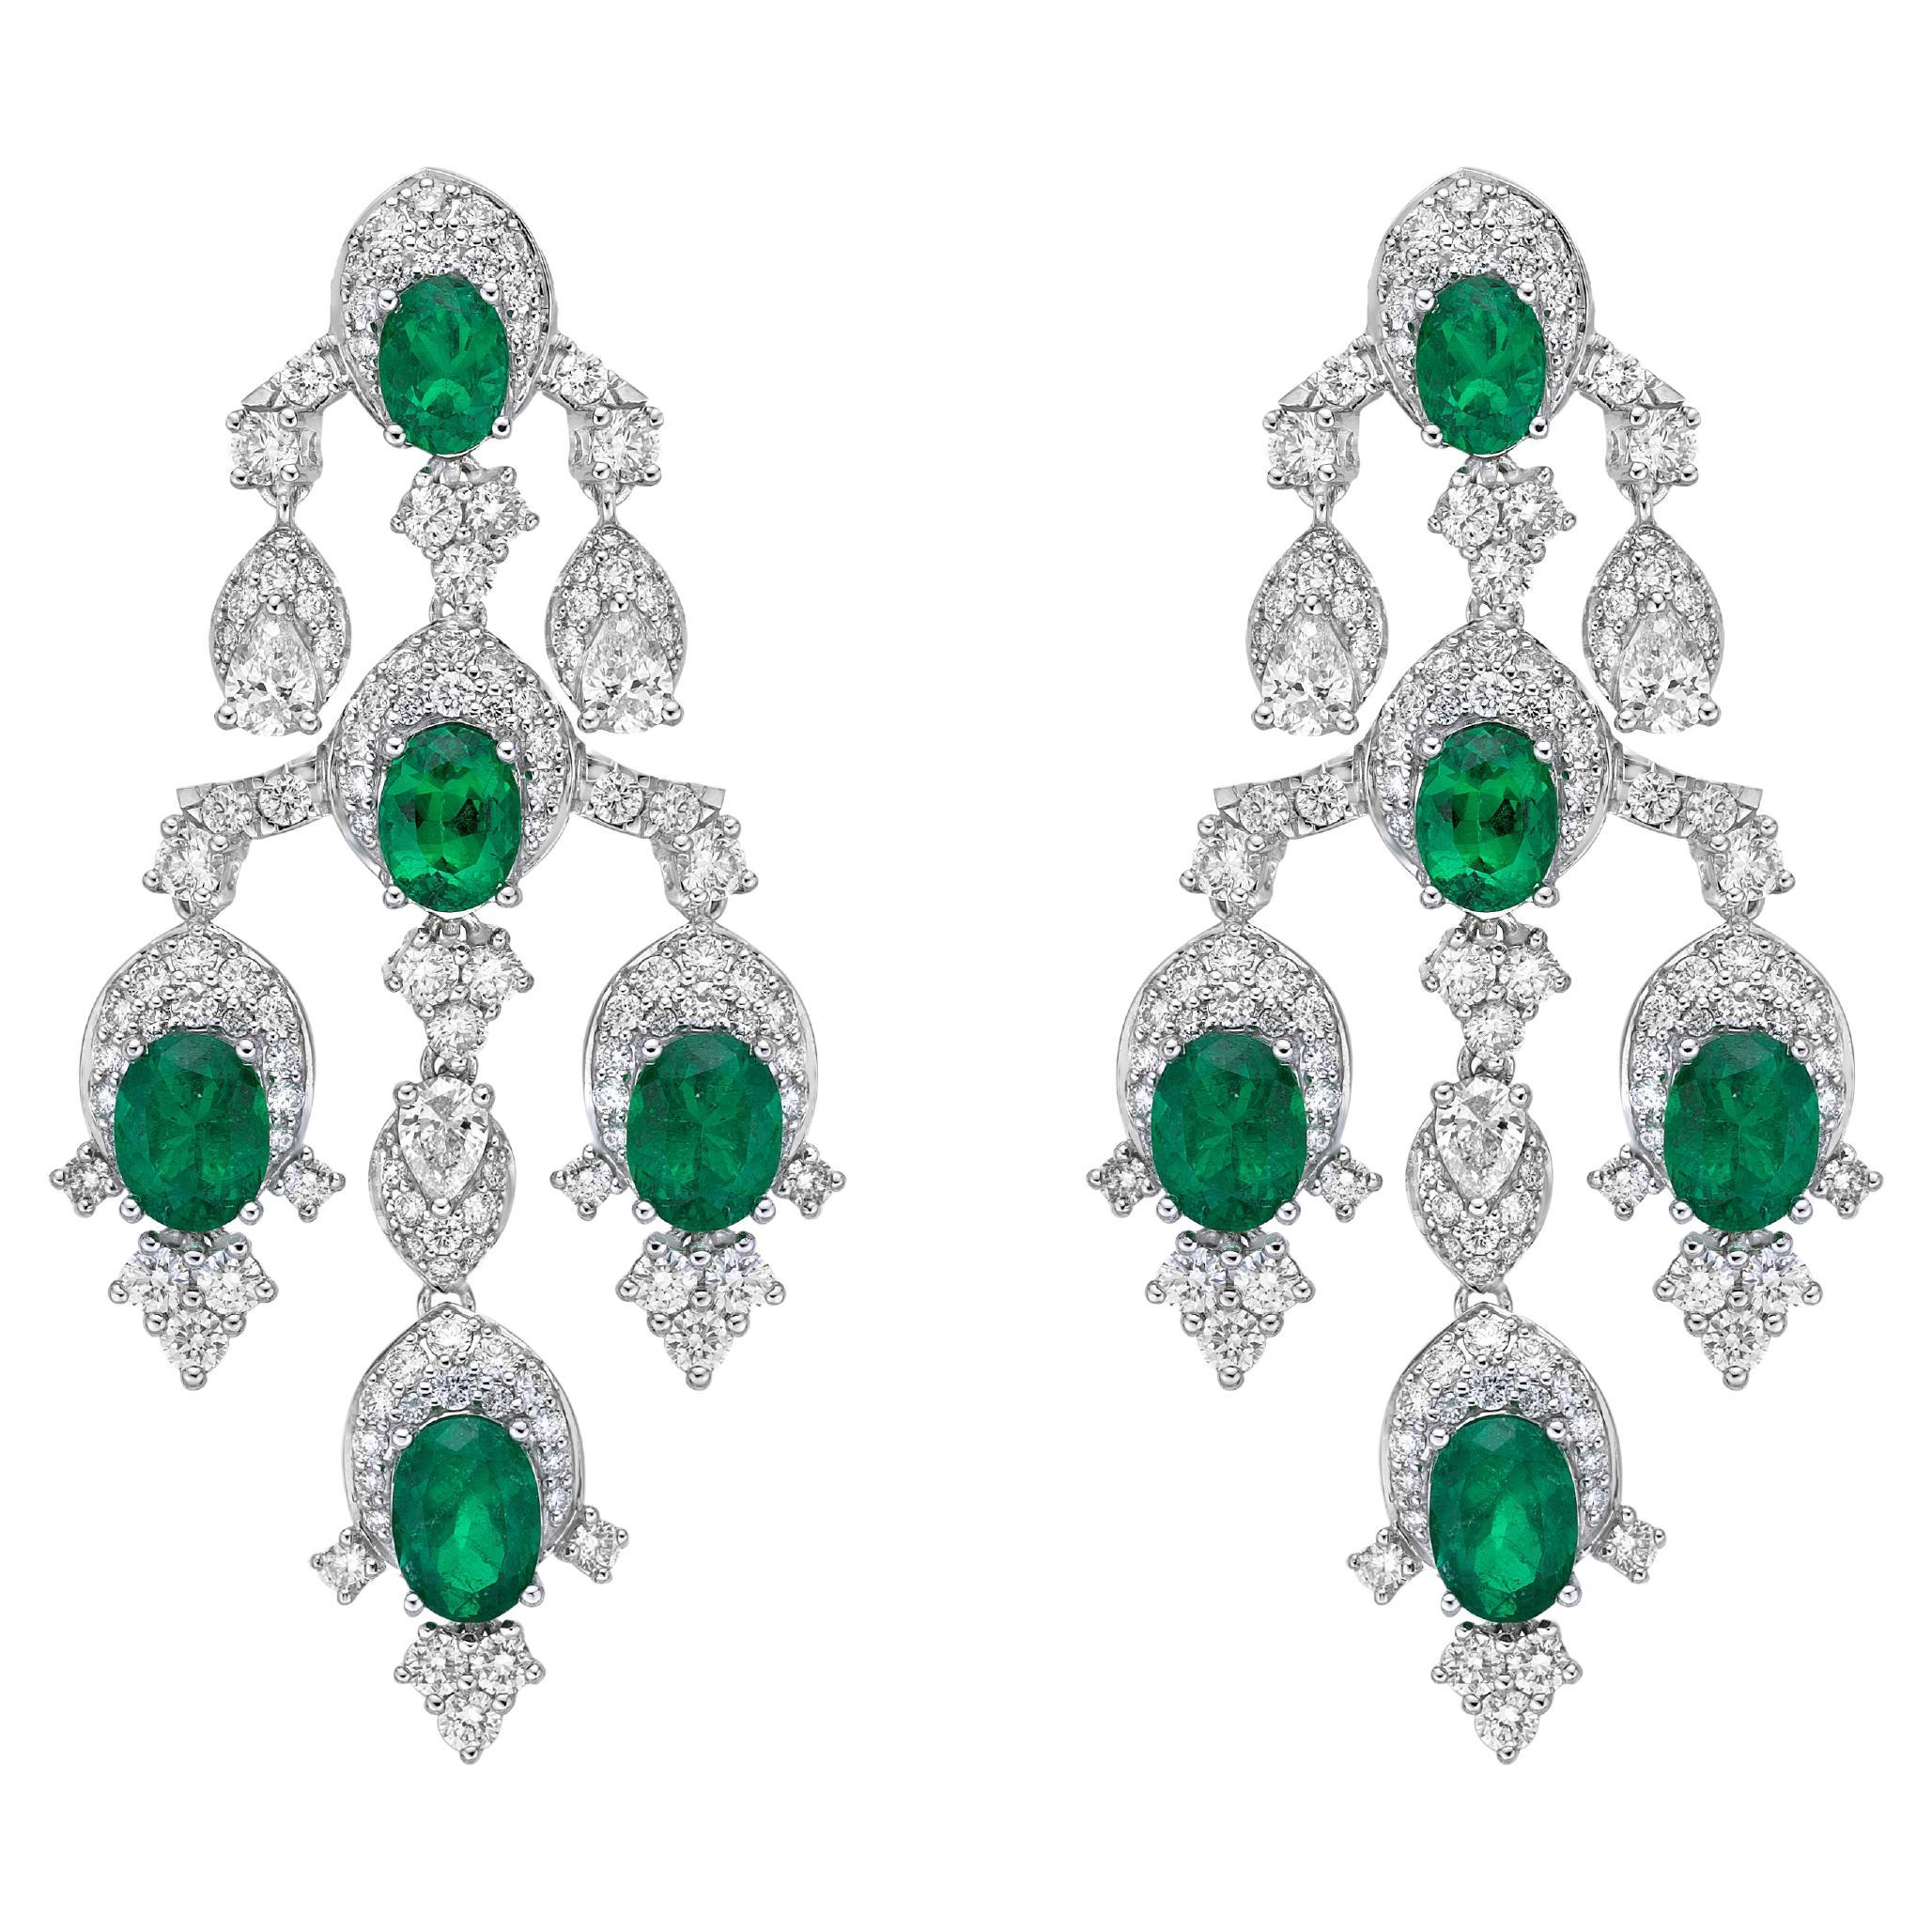 Contemporary Emerald Earrings in 18 Karat White Gold with Diamond